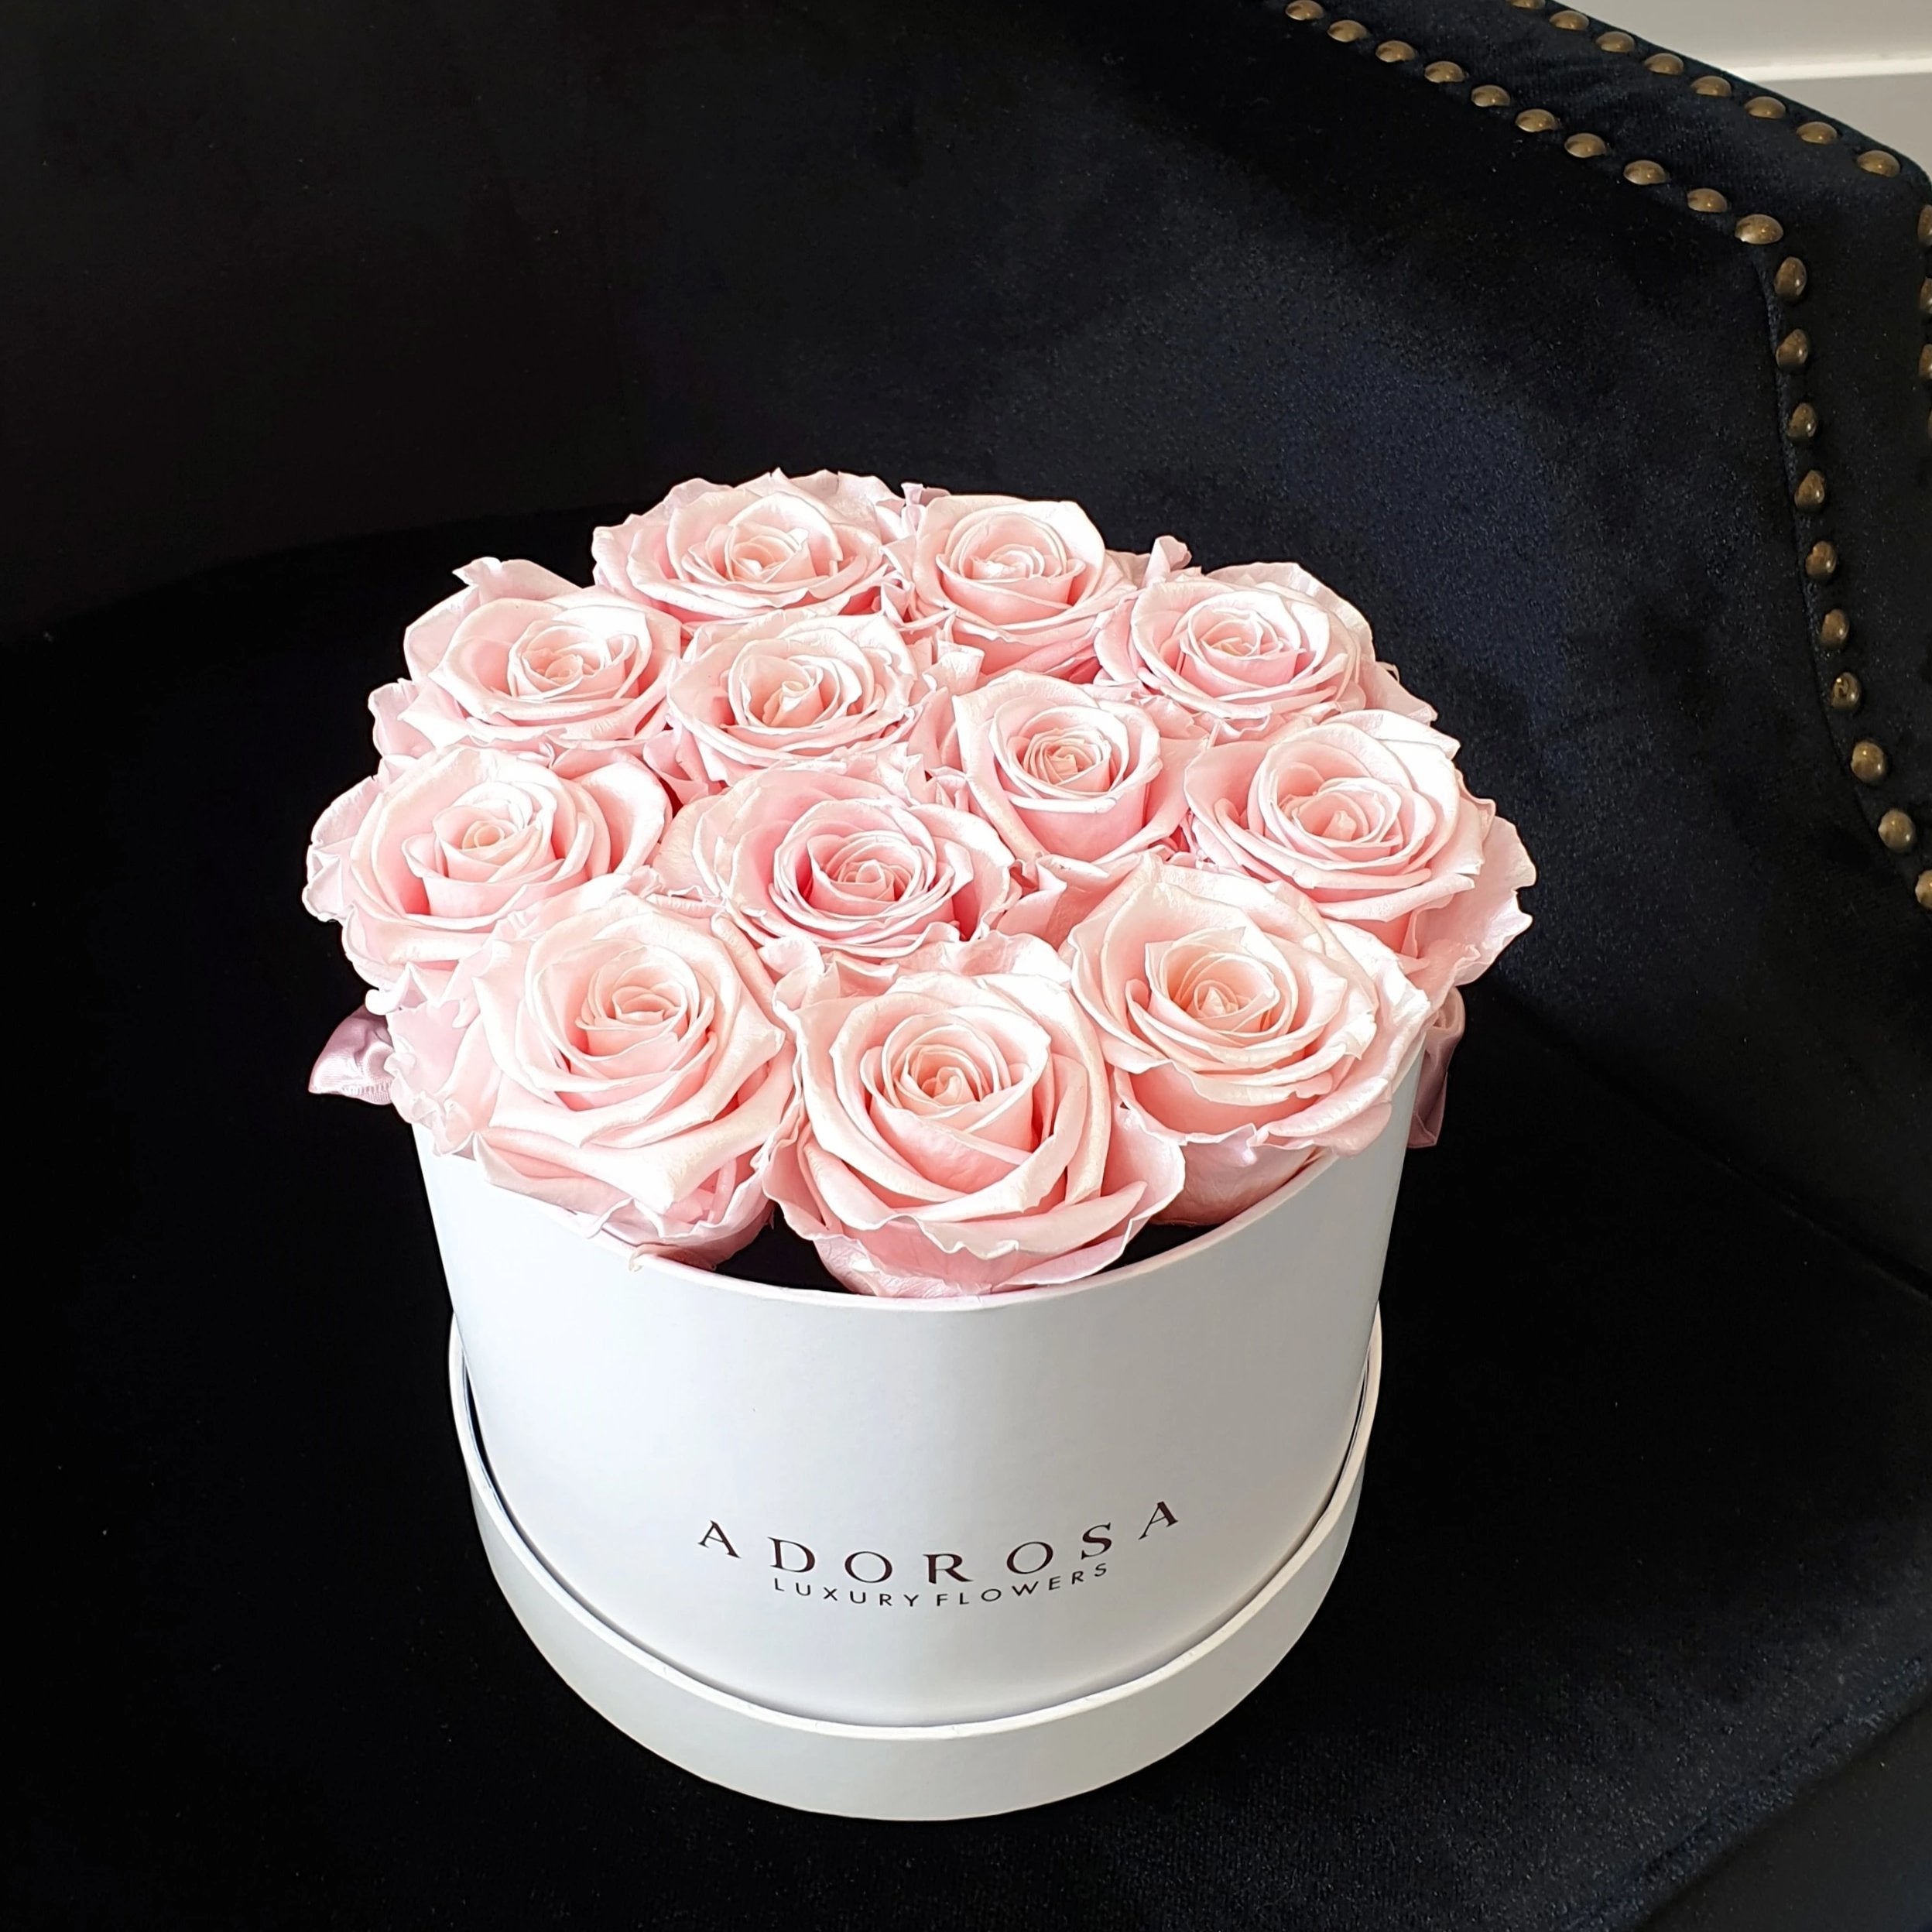 long lasting roses, metallic roses, pink roses, rose box delivery sydney, luxury rose box